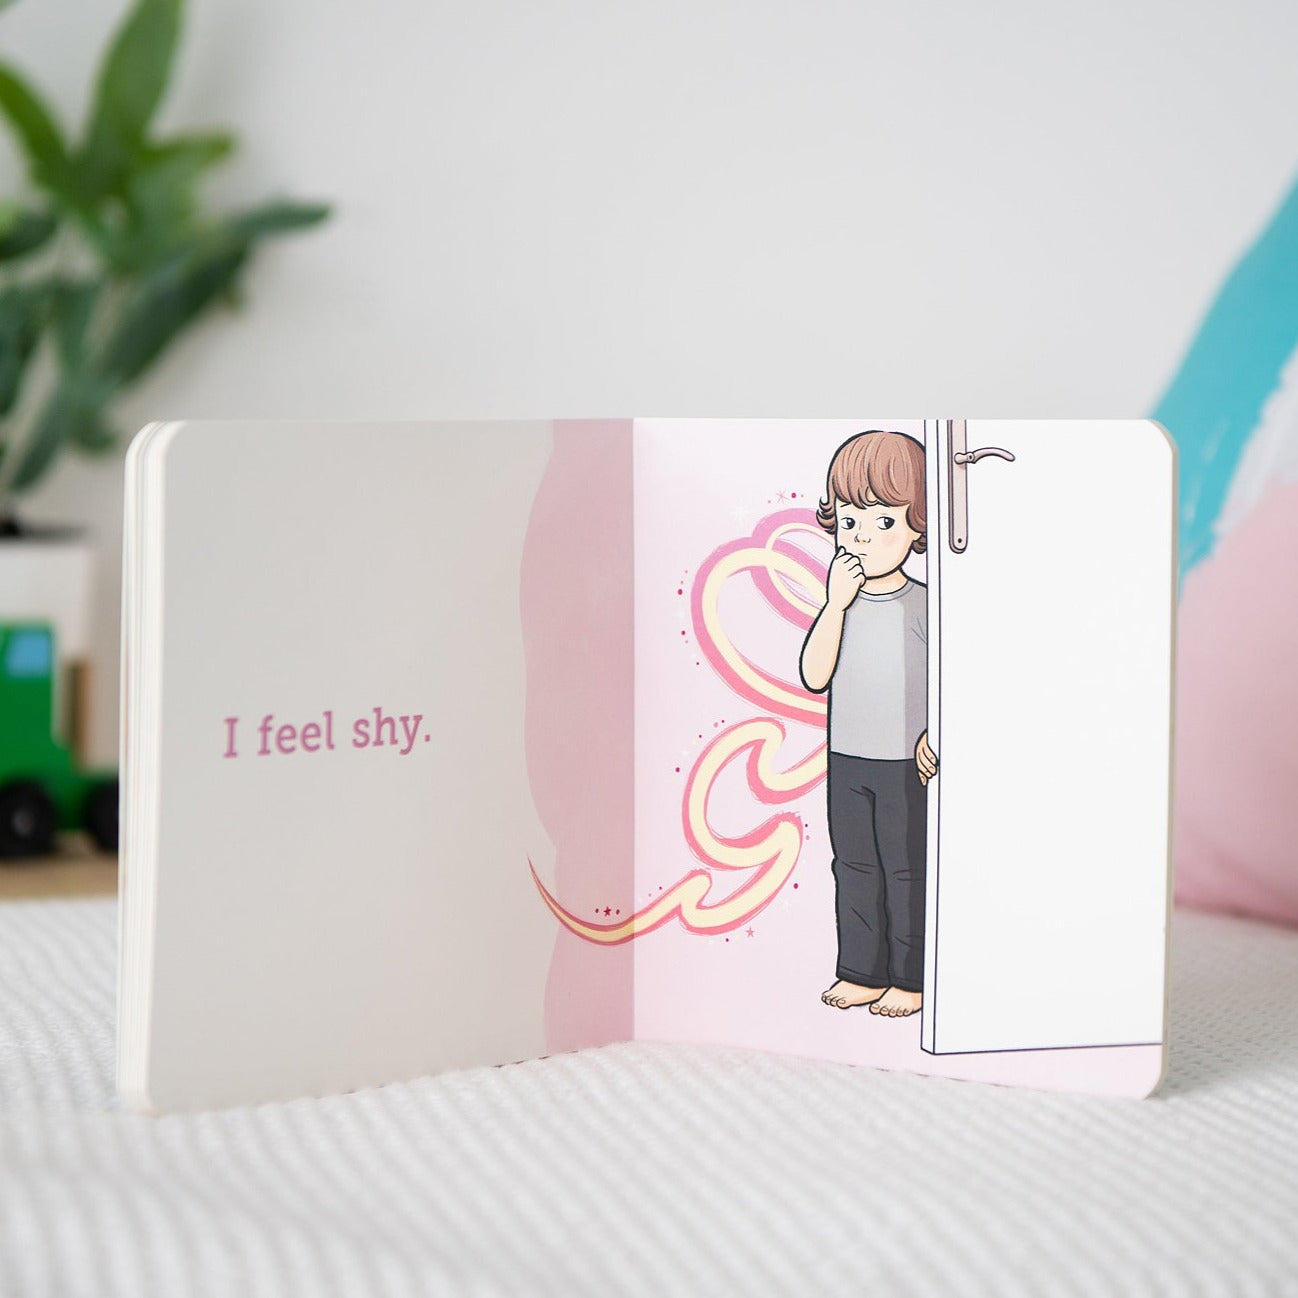 Page titled I feel shy with boy hiding behind door.